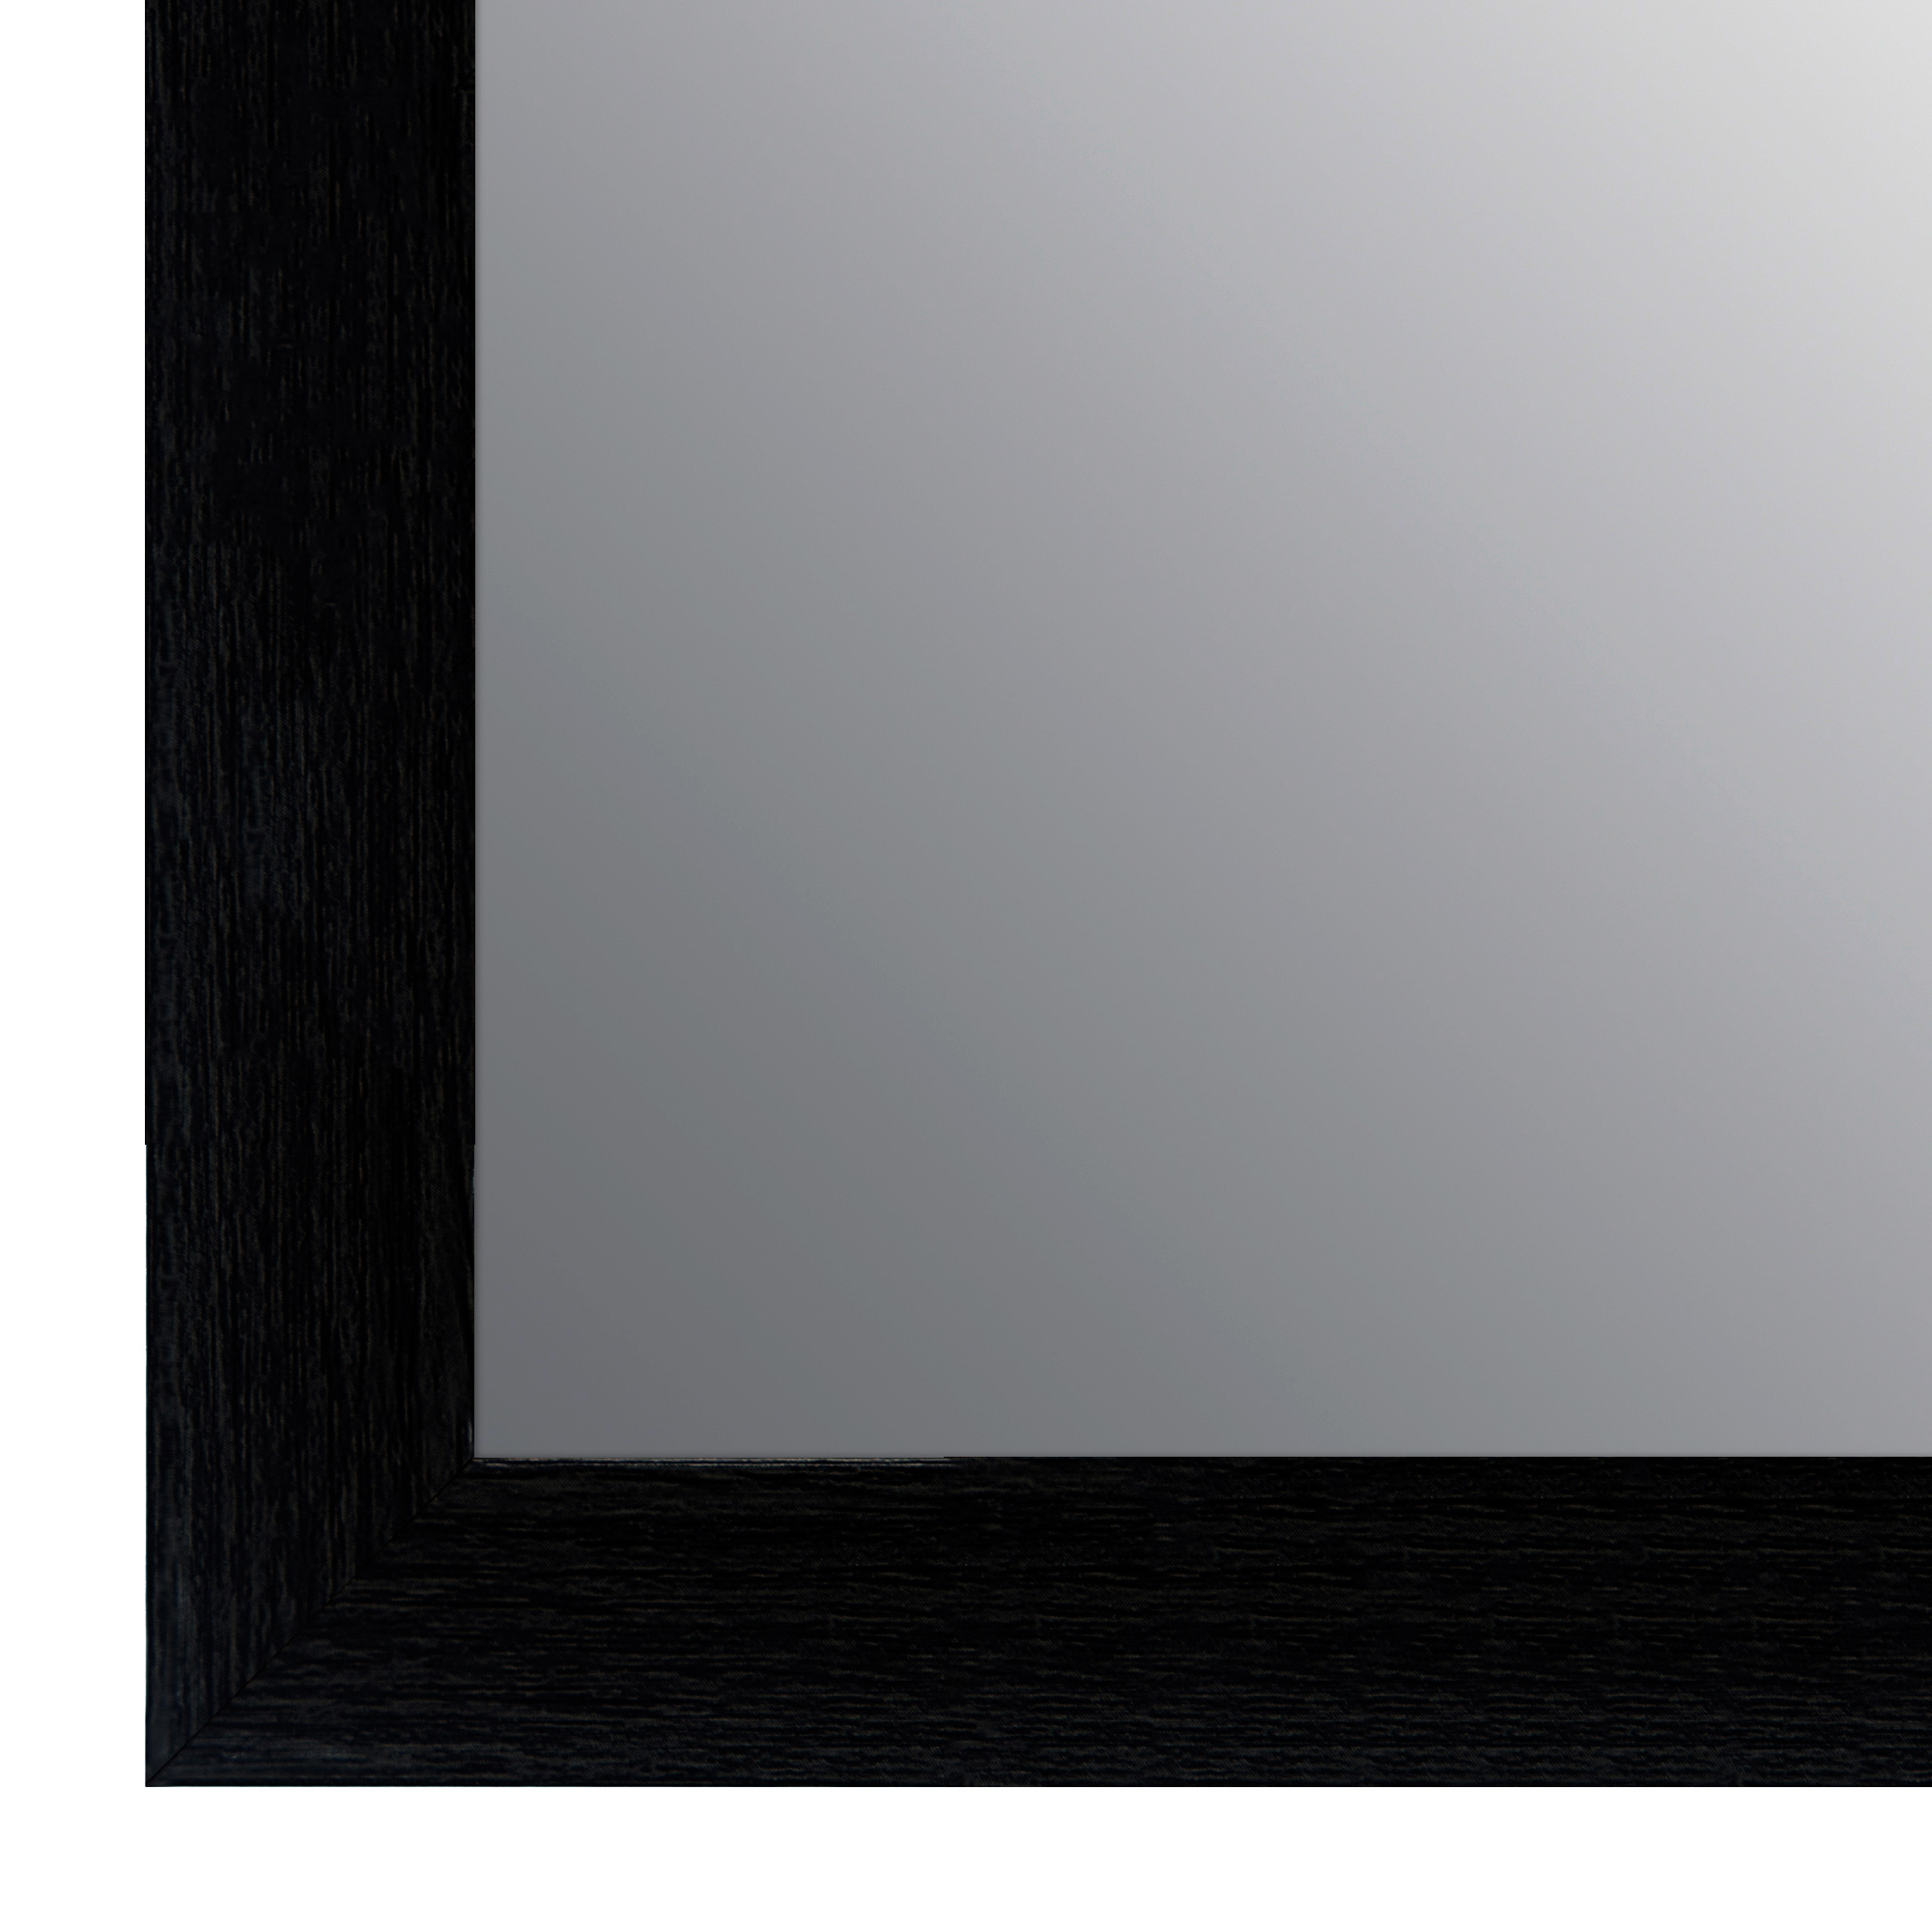 Framed Black Floor Free Standing Mirror with Easel 16"x57" by Gallery Solutions - image 3 of 5